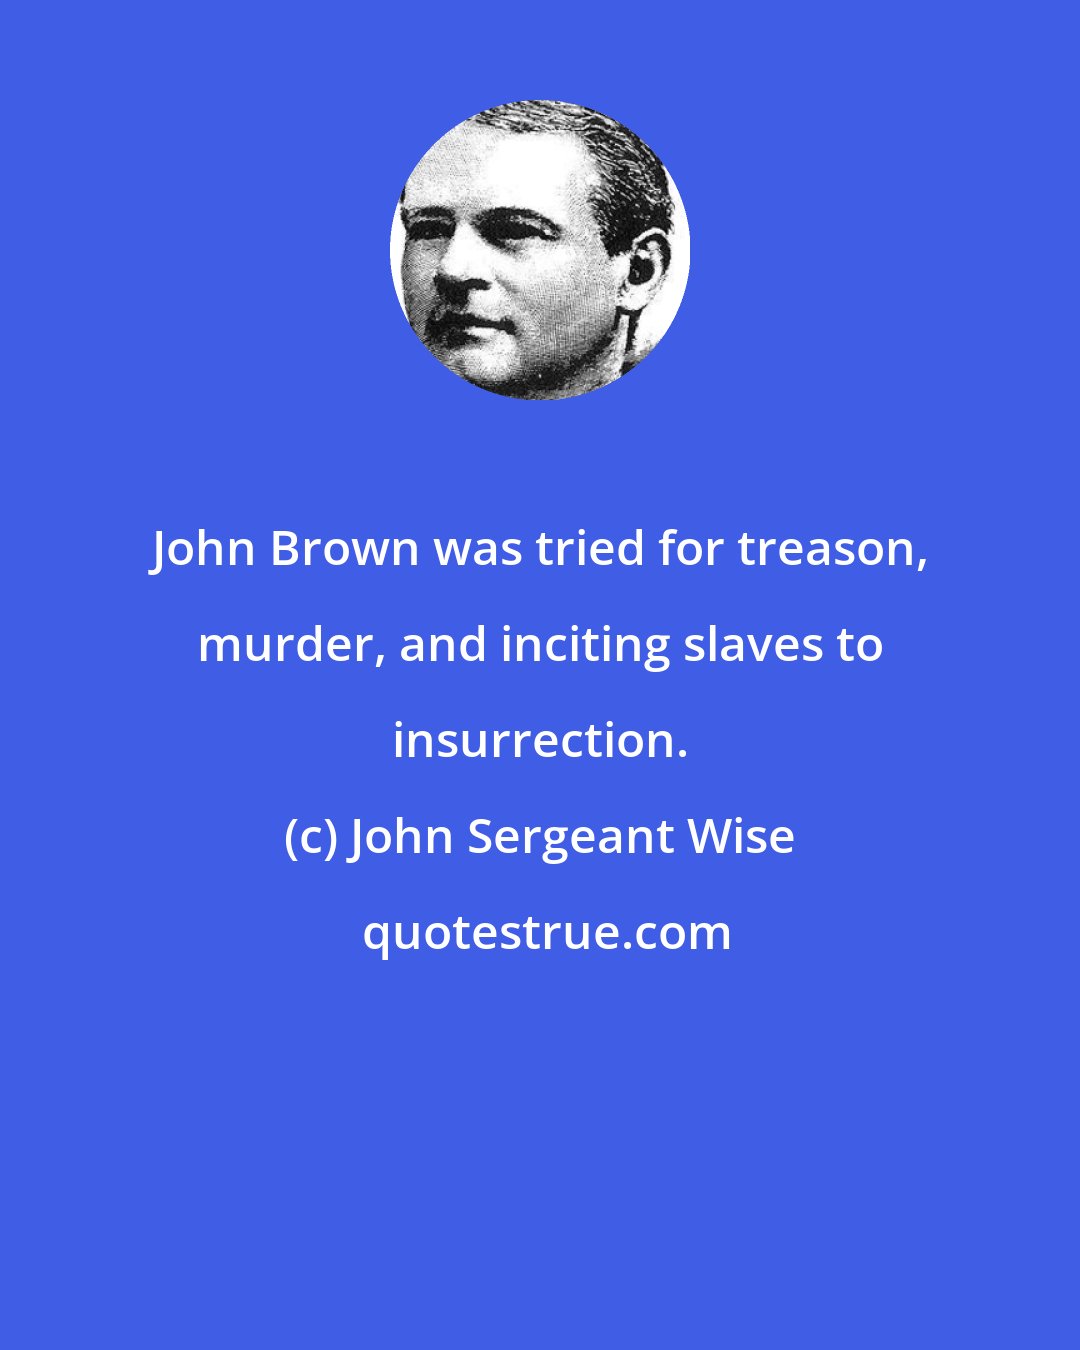 John Sergeant Wise: John Brown was tried for treason, murder, and inciting slaves to insurrection.